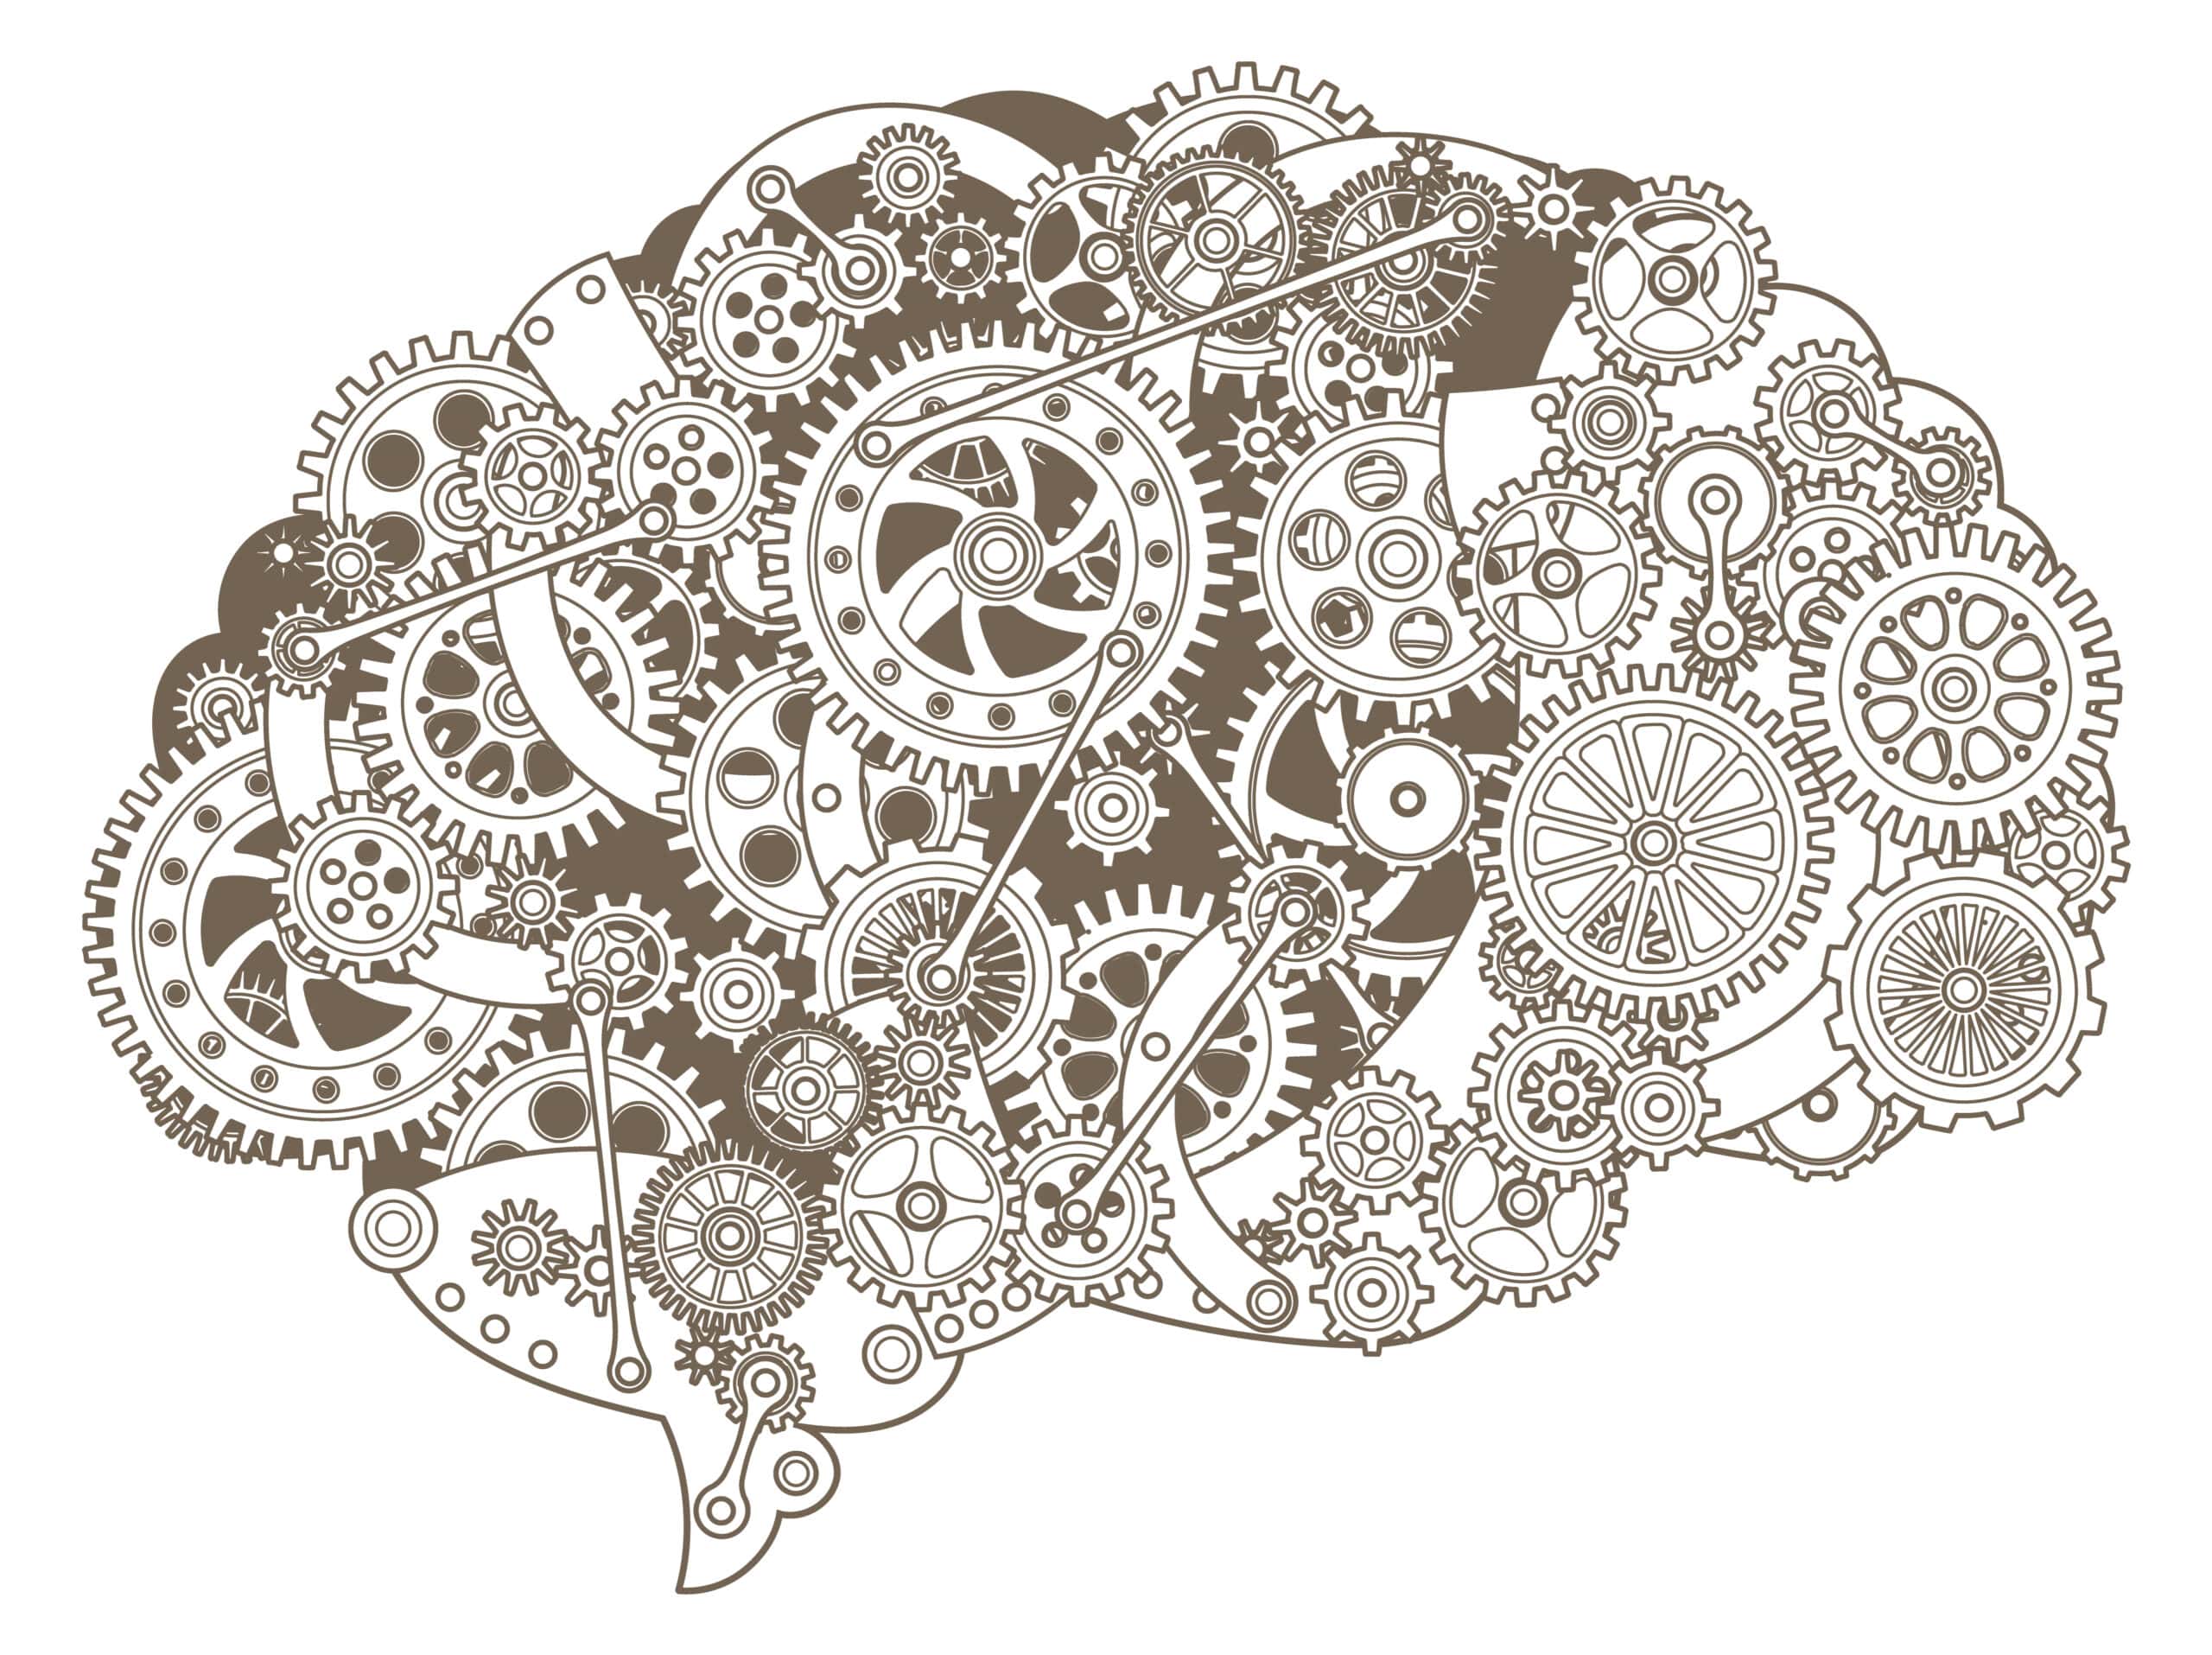 Brain silhouette with retro gears. Creative intellect illustration isolated on white background